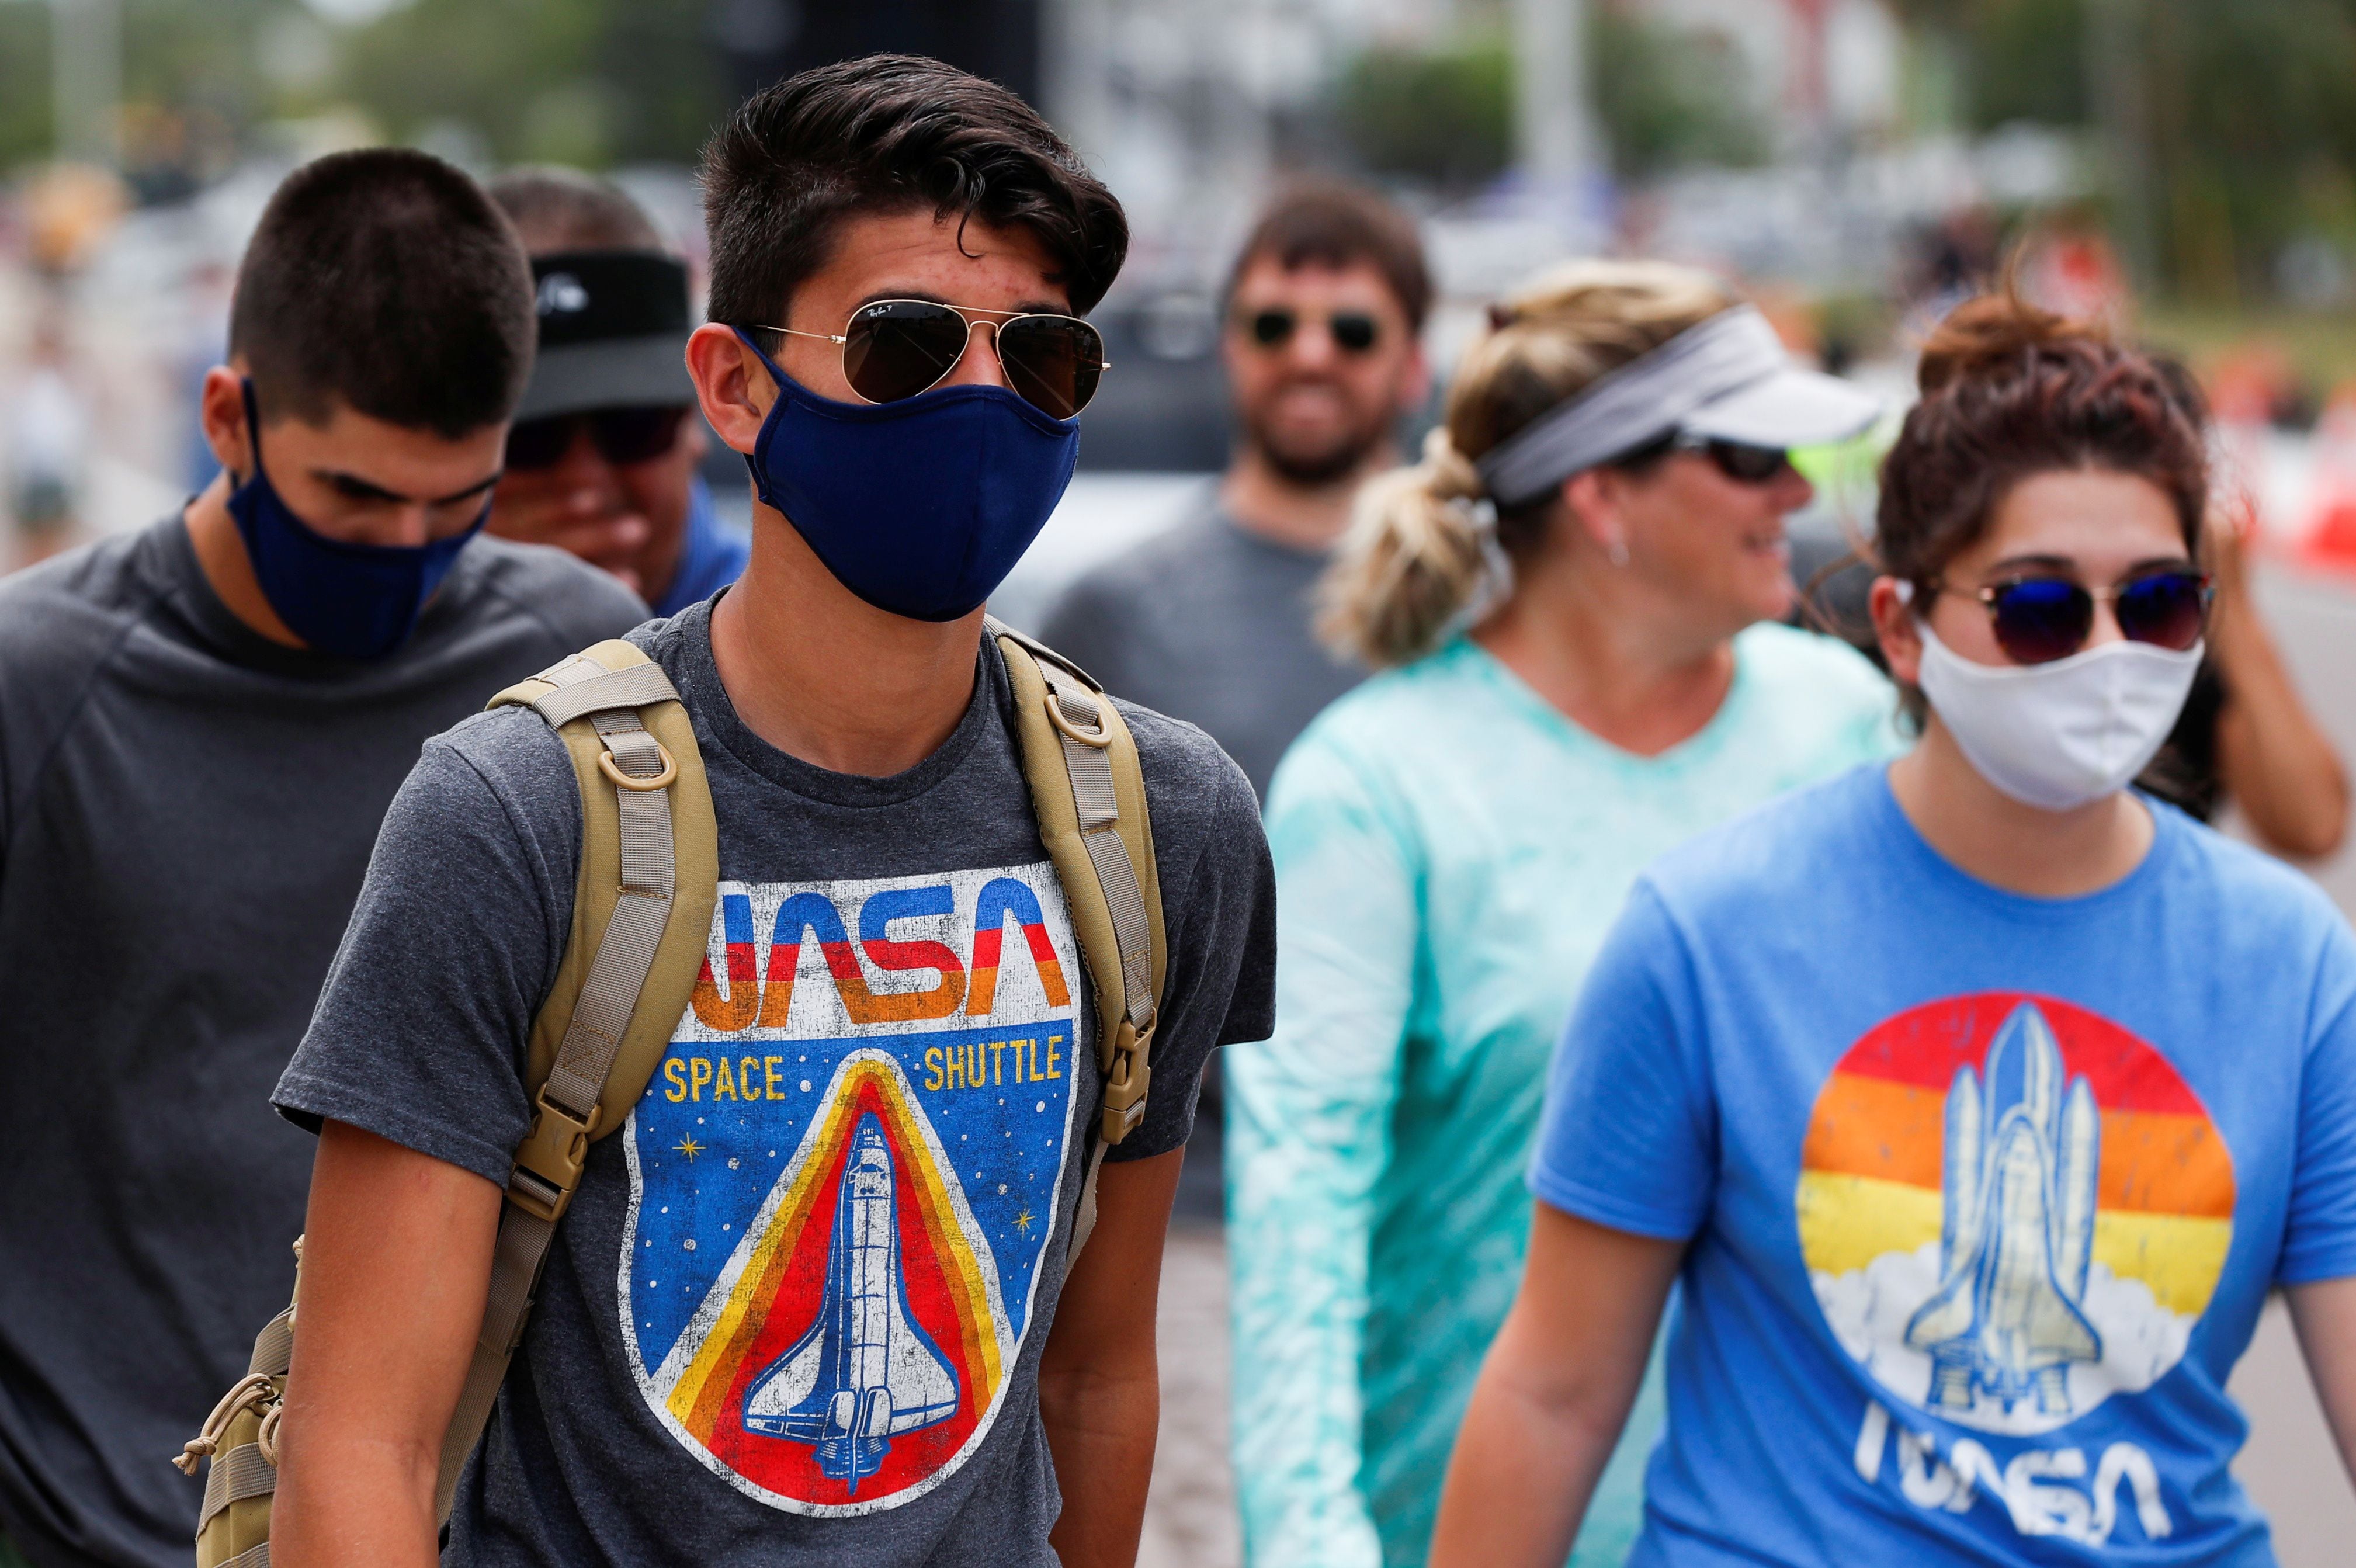 People wearing NASA'S T-shirts attend to watch the launching of a SpaceX Falcon 9 rocket and Crew Dragon spacecraft carrying NASA's astronauts Douglas Hurley and Robert Behnken during NASA's SpaceX Demo-2 mission to the International Space Station from NASA's Kennedy Space Center, in Cape Canaveral, Florida, U.S. May 30, 2020. REUTERS/Scott Audette